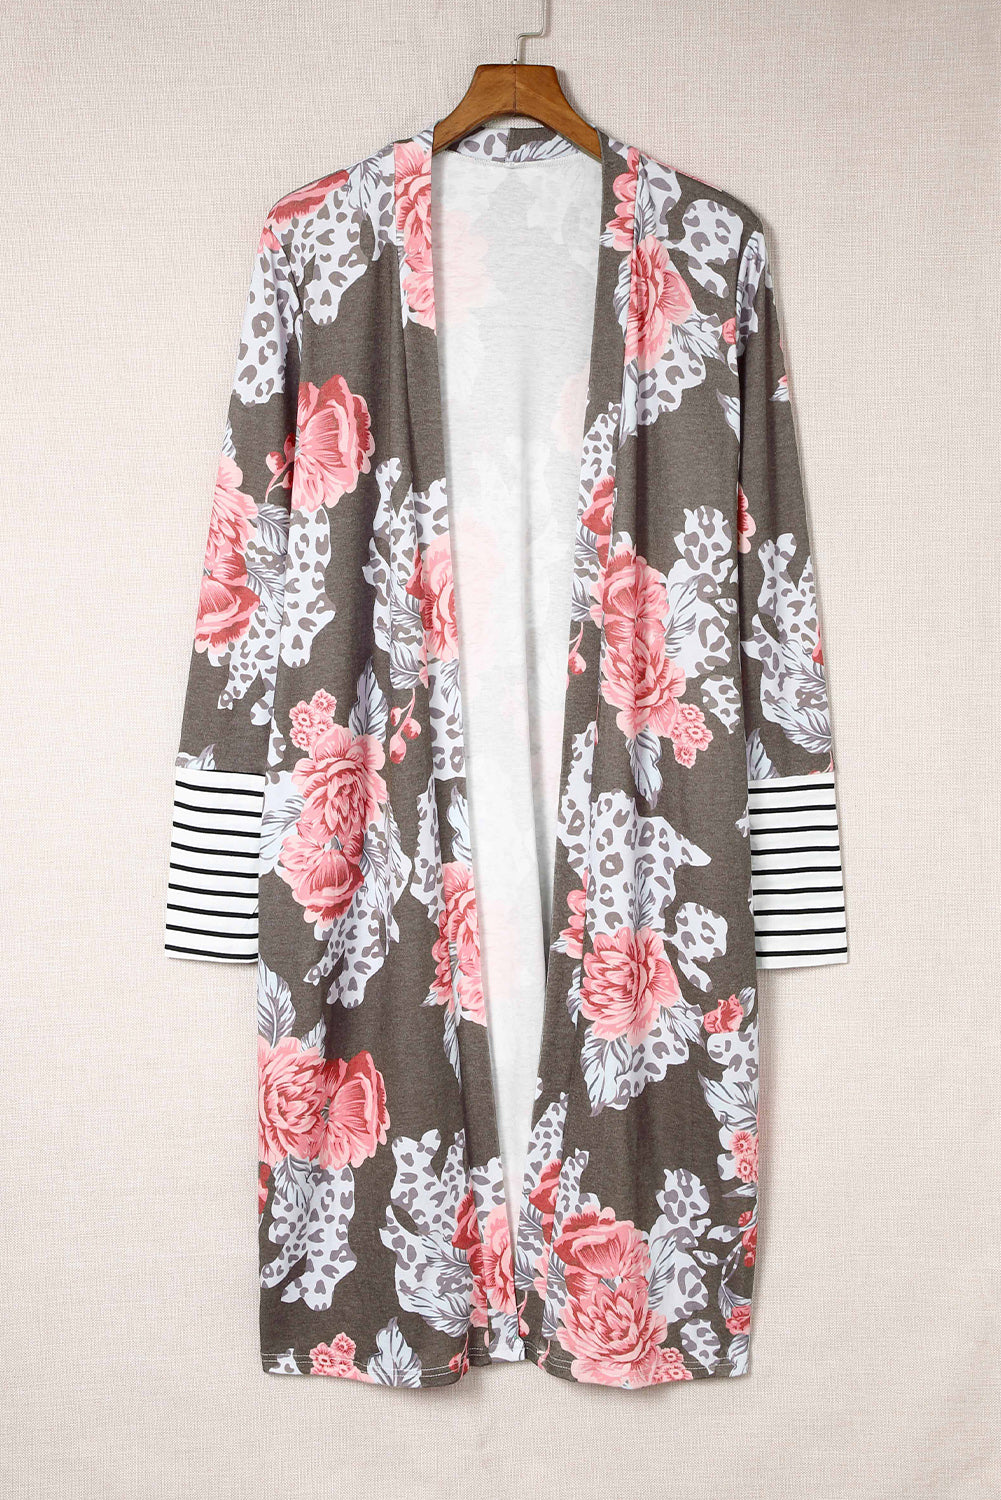 Brown Floral Print Casual Striped Cuffs Long Cover Up